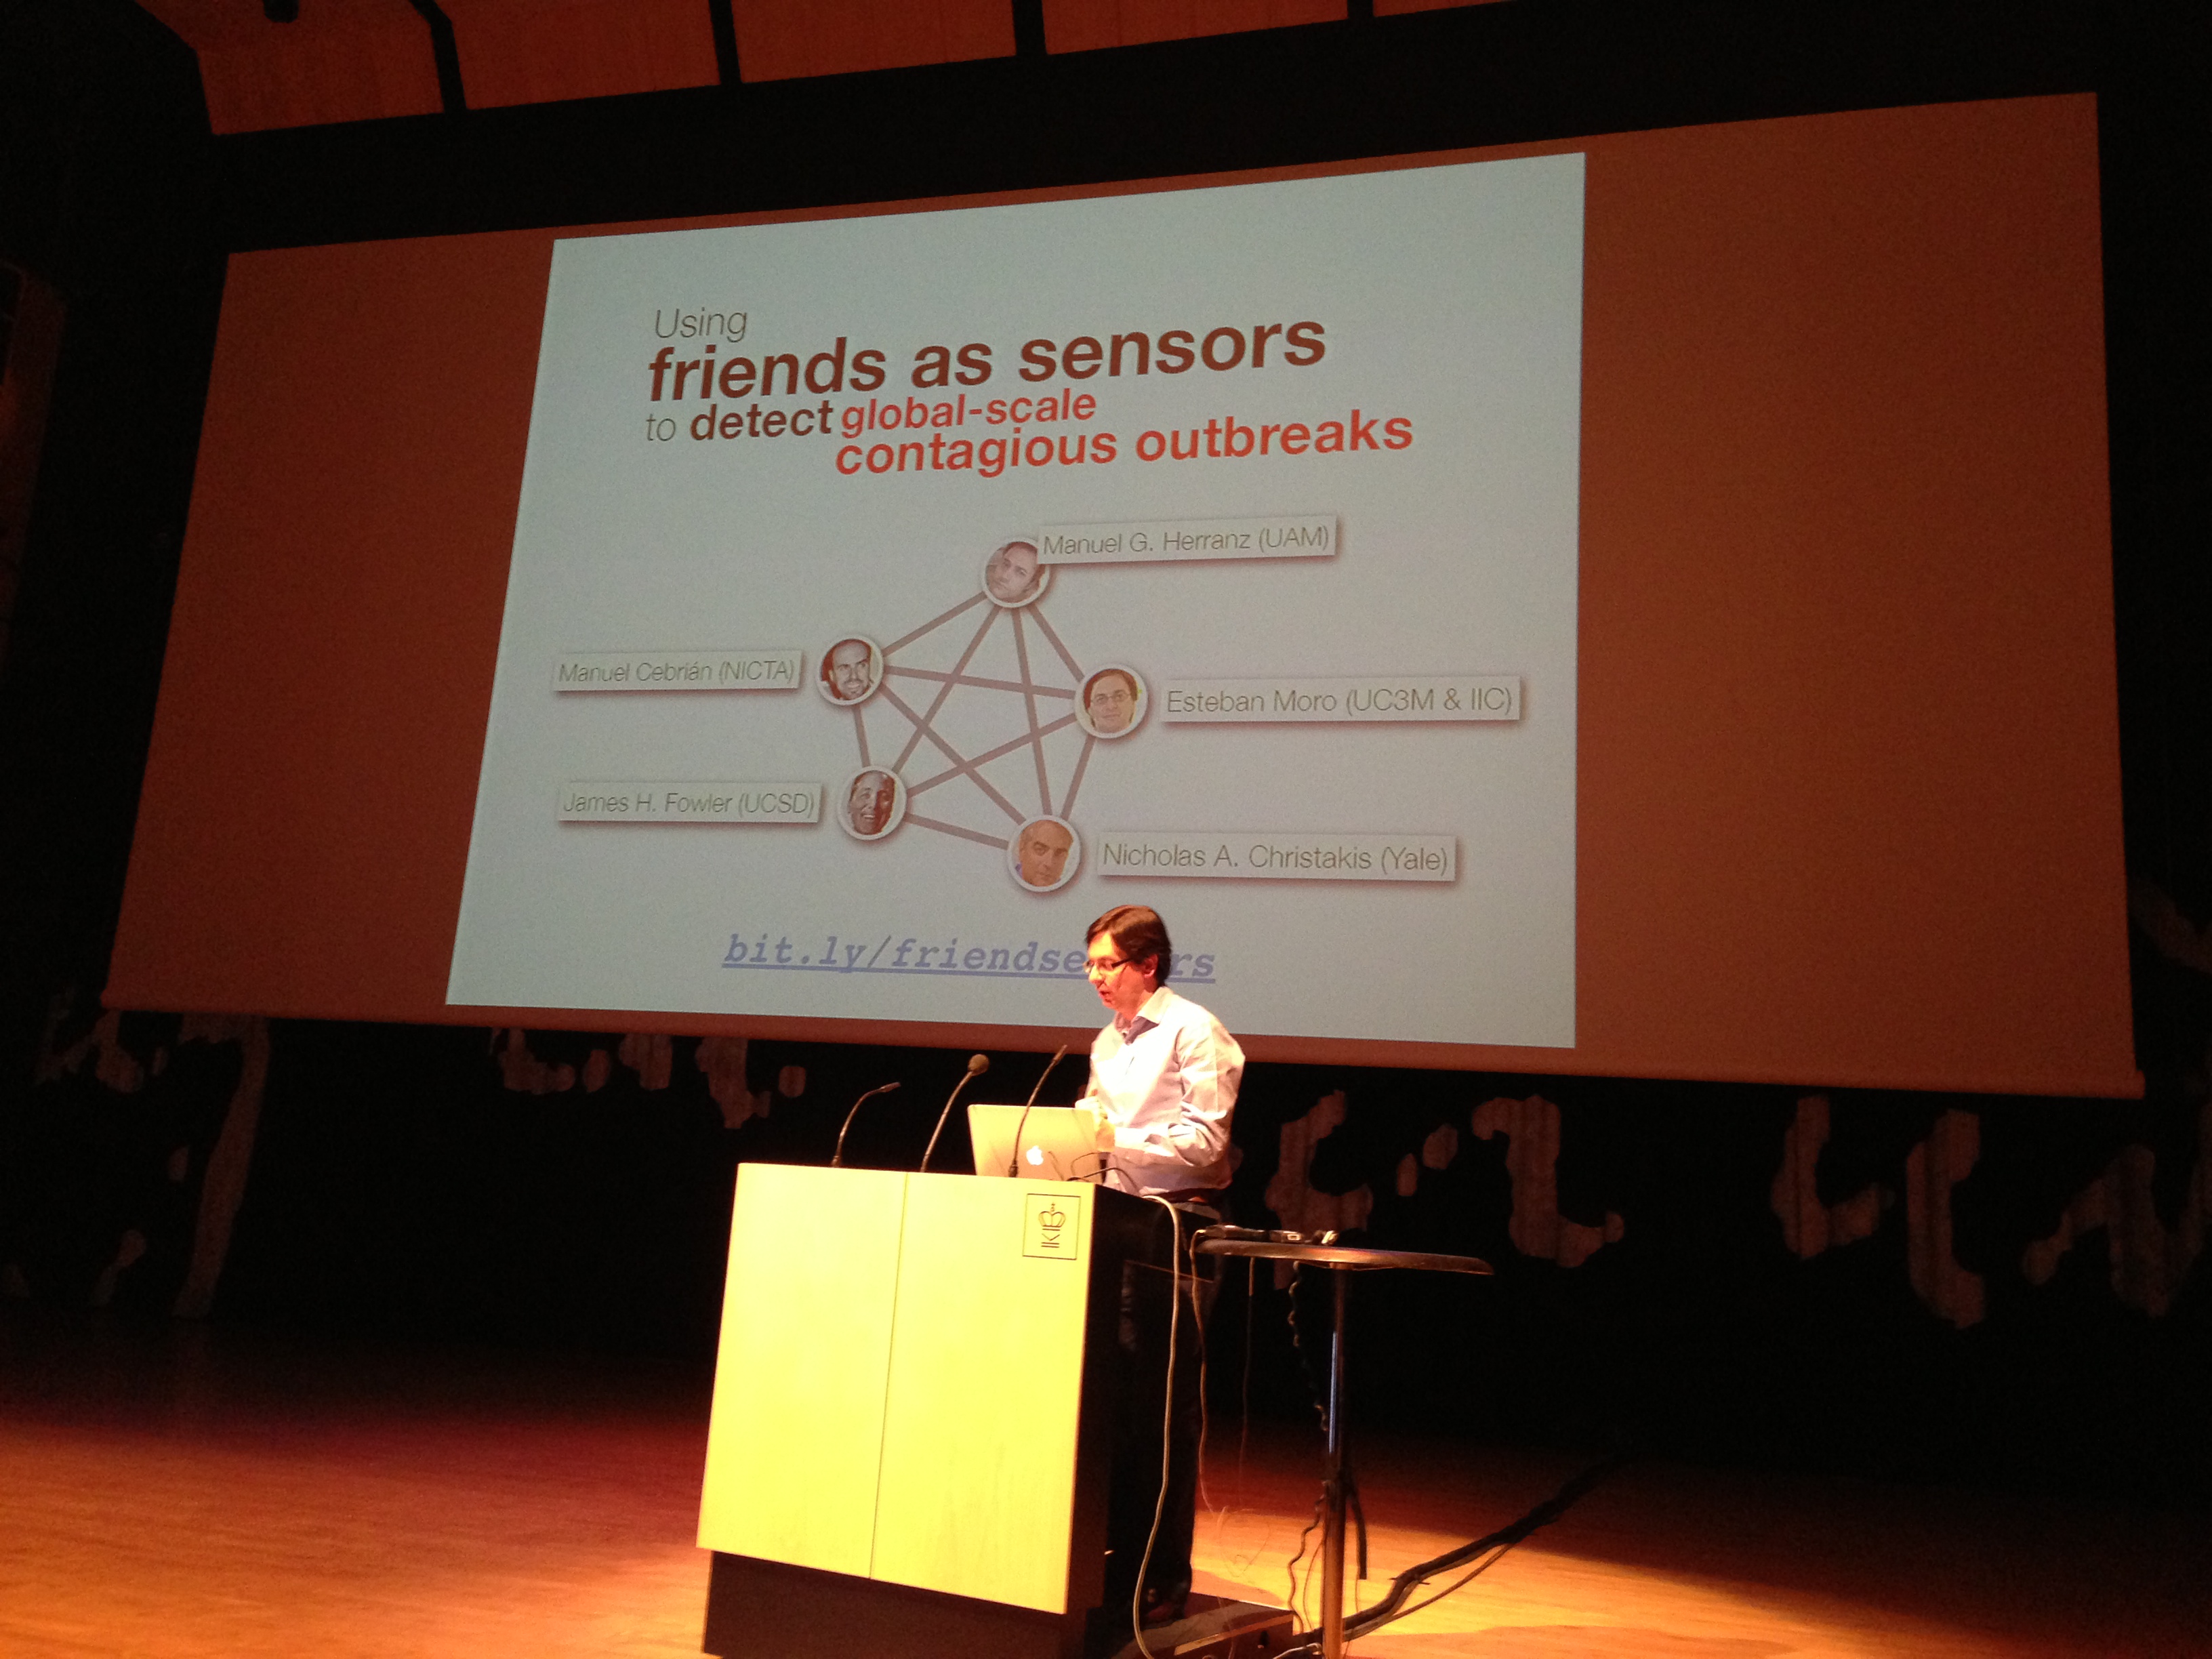 My first Ignite Talk! Given at Netsci about our work on social sensors